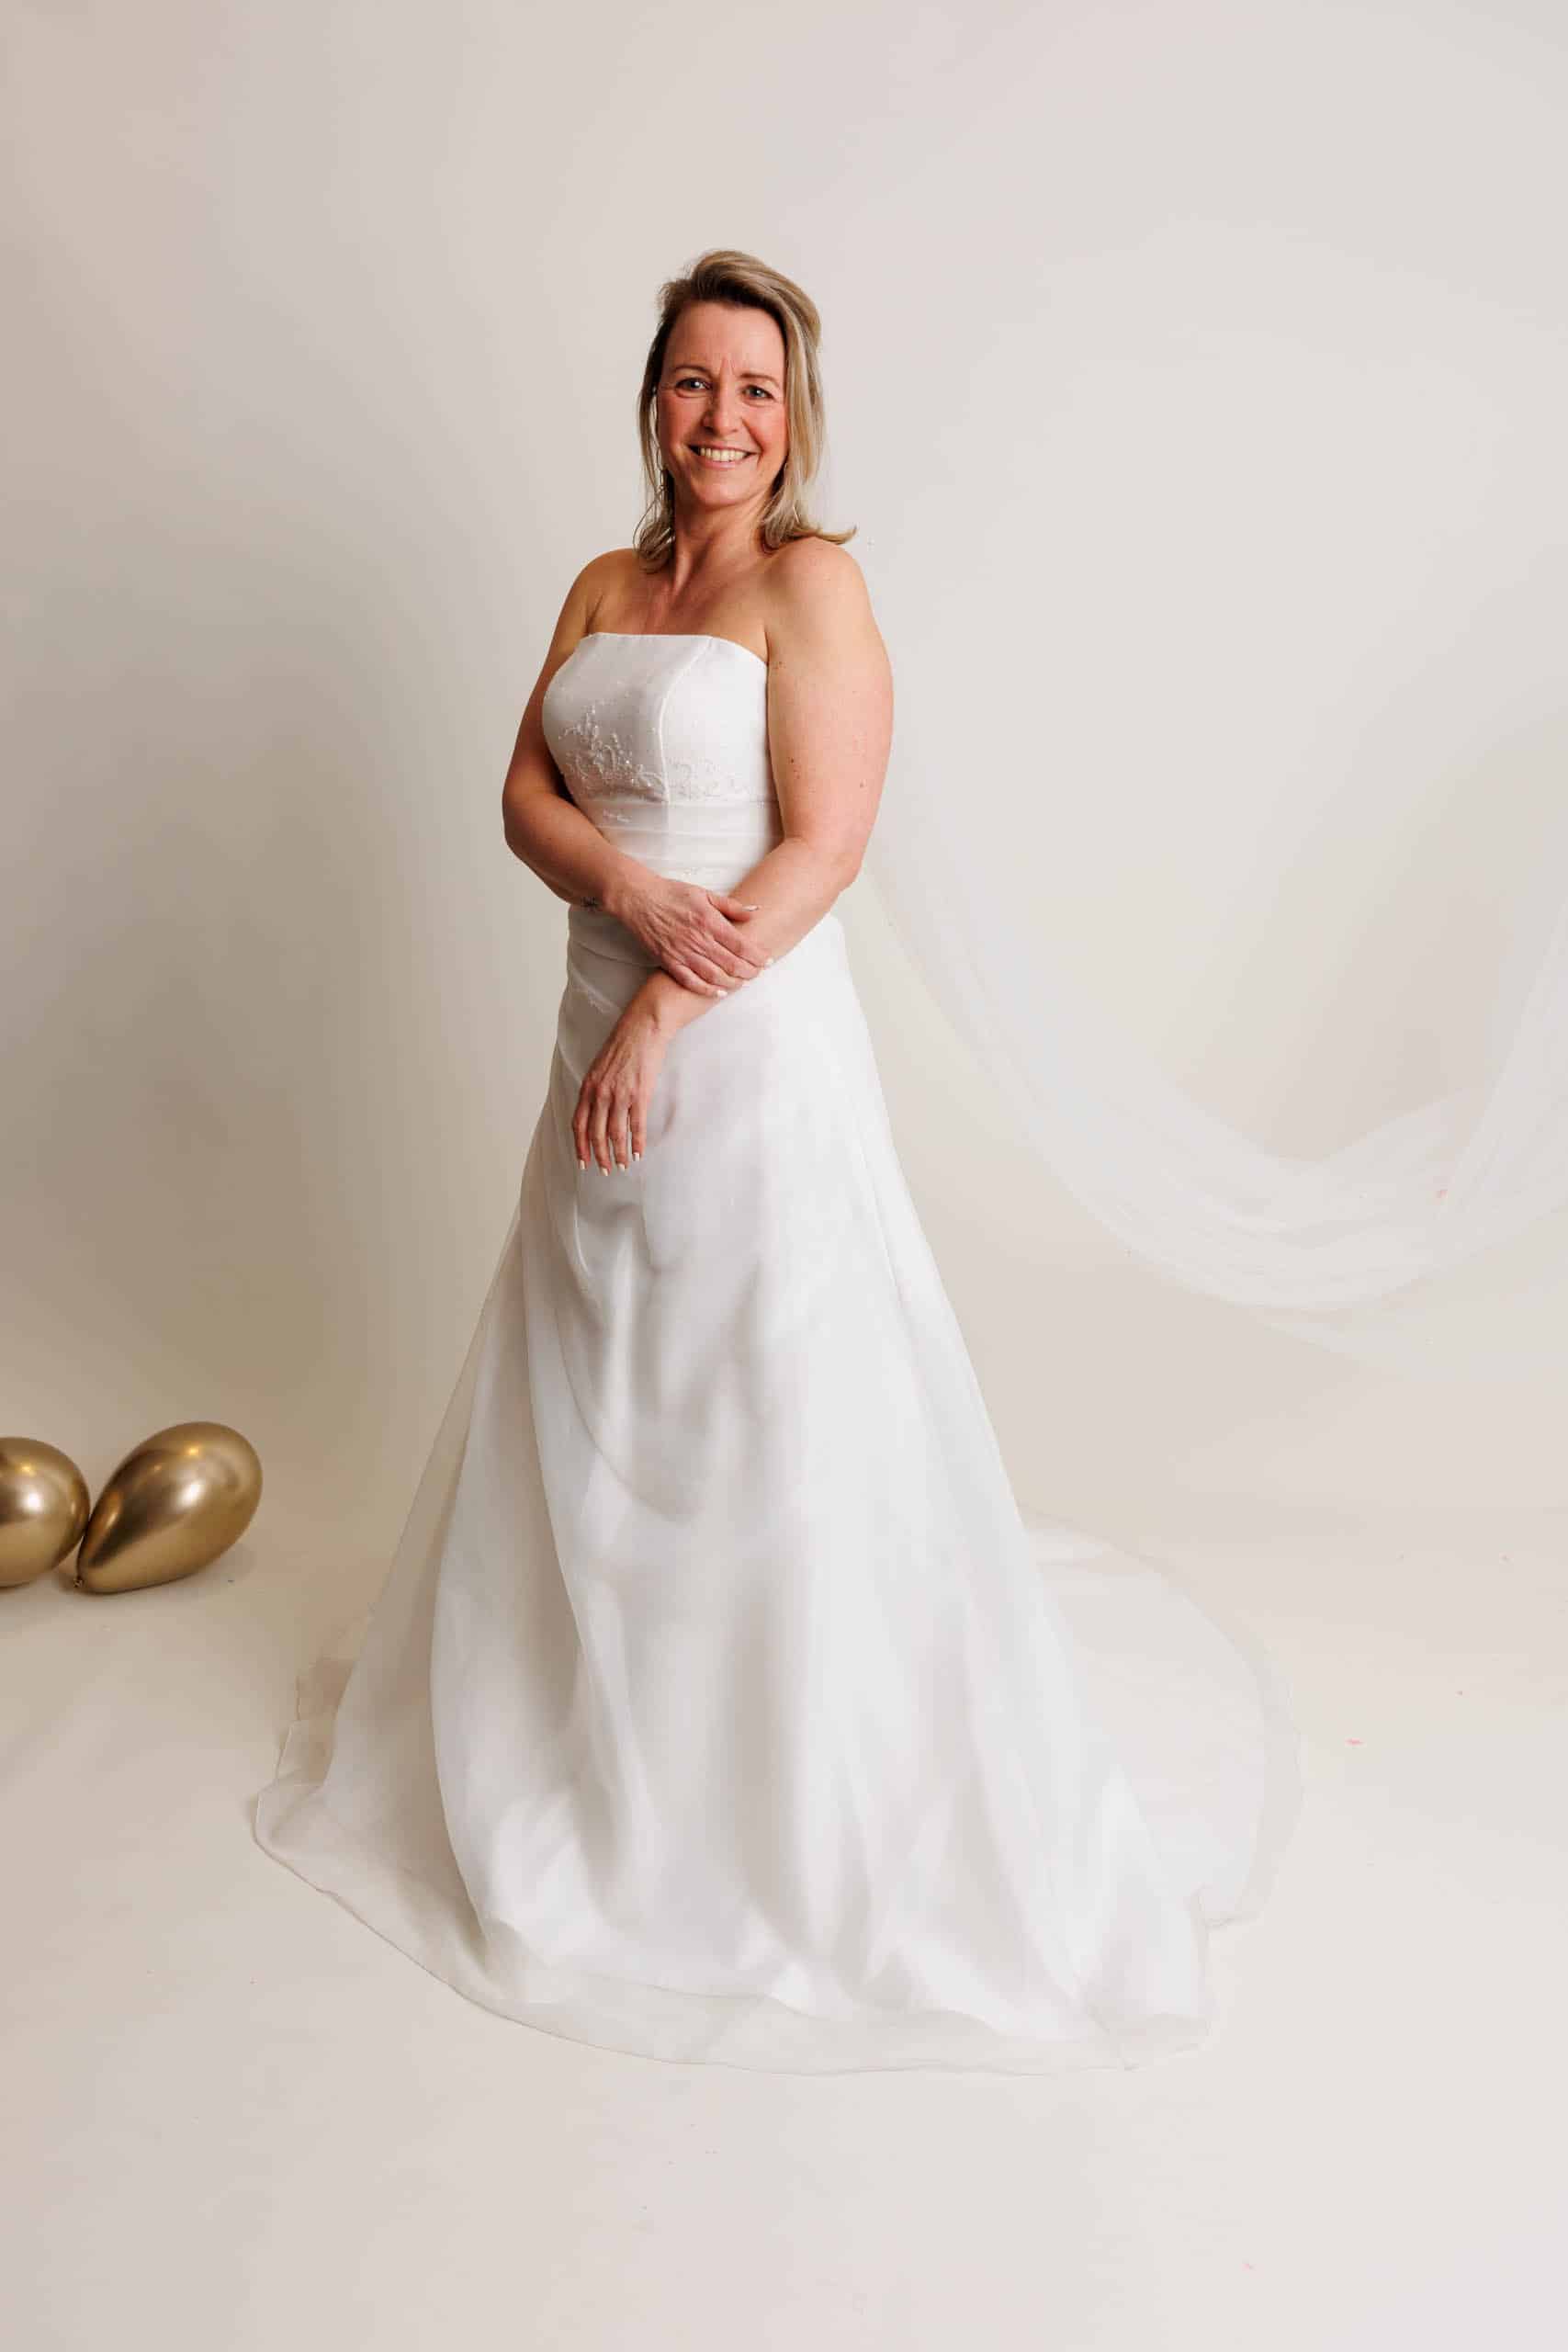 A woman in a wedding dress poses for a photo while trying on wedding dresses.